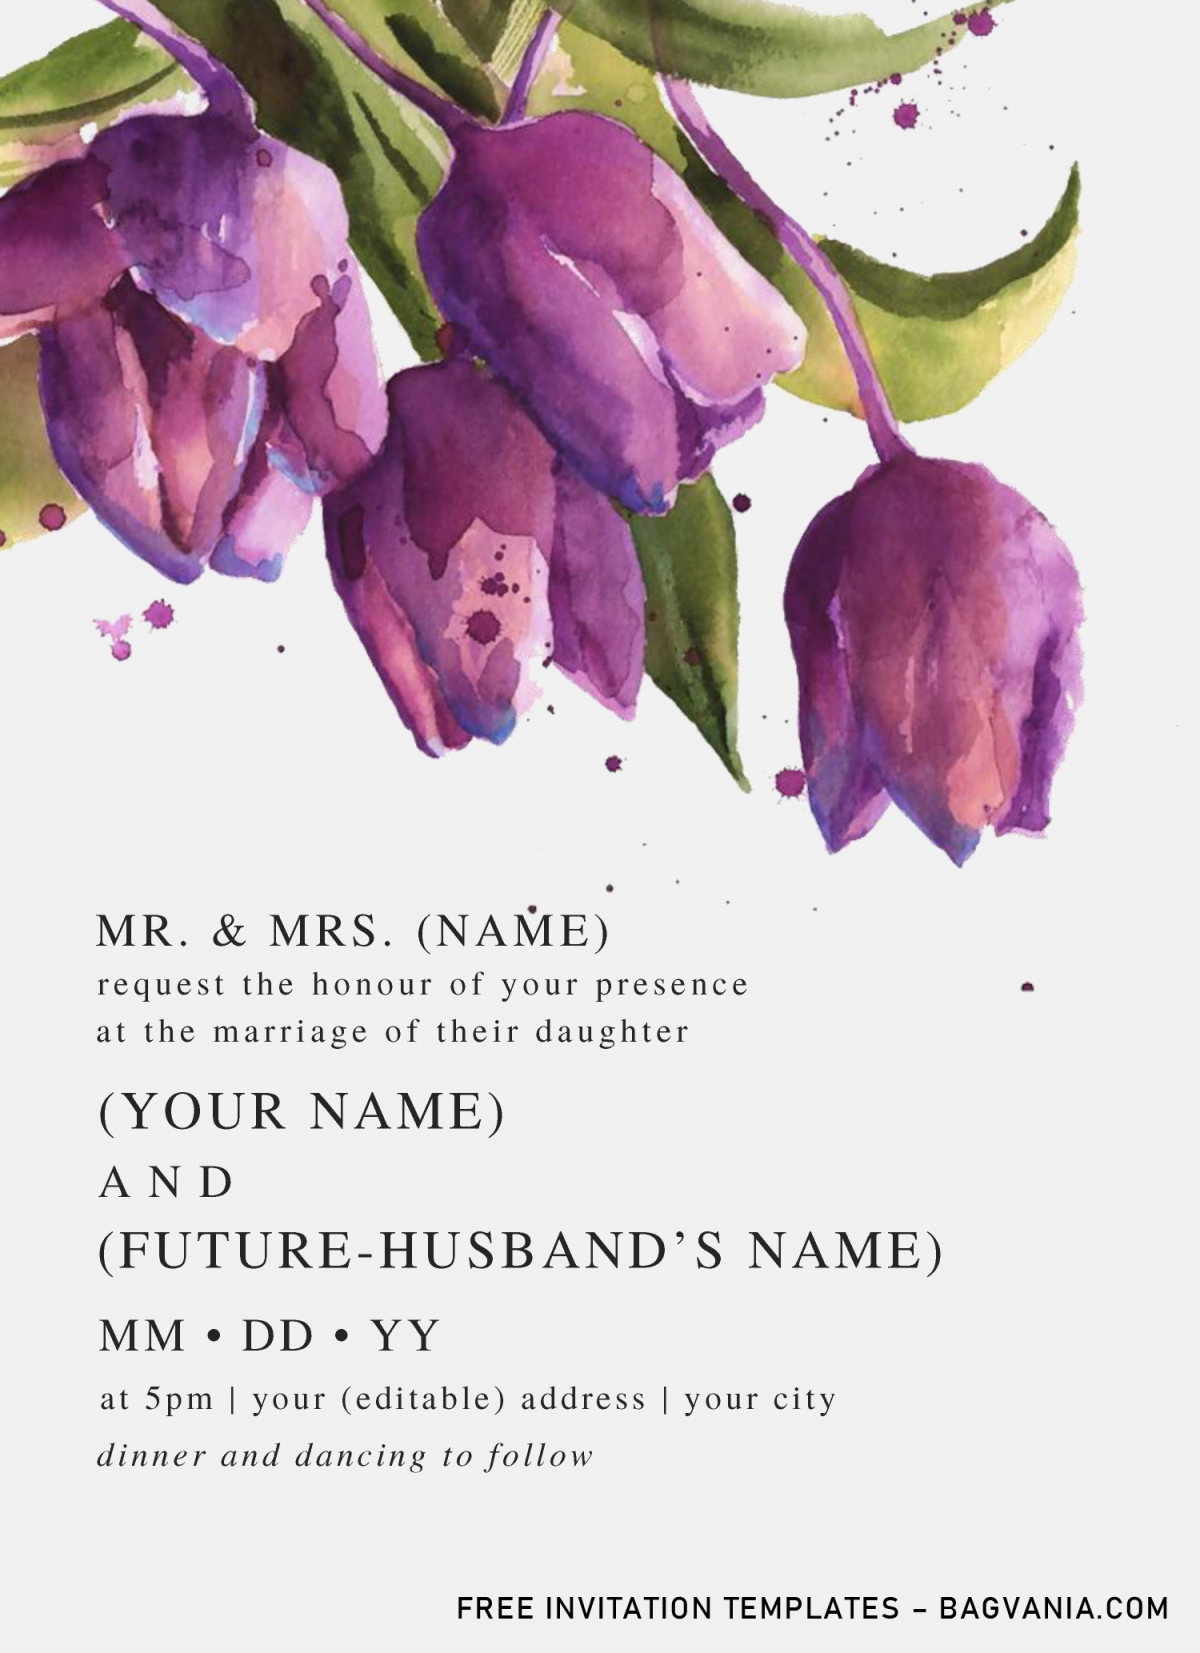 Watercolor Tulips Invitation Templates - Editable With MS Word and has 